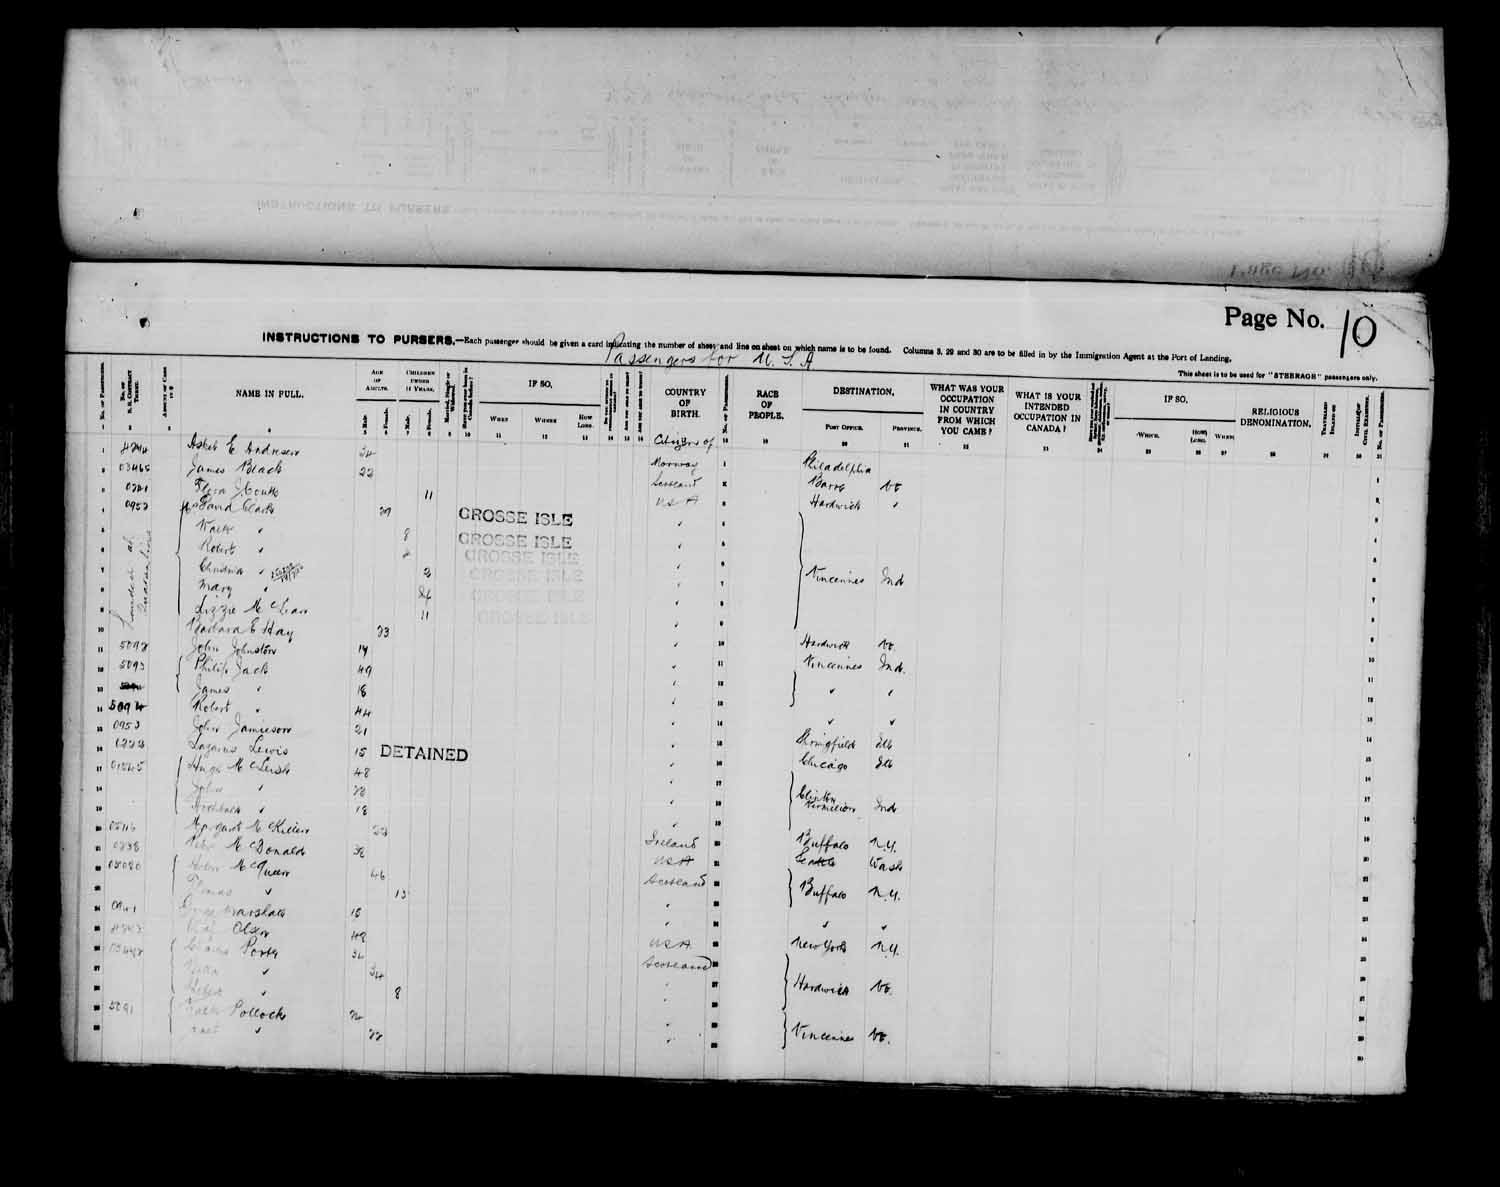 Digitized page of Passenger Lists for Image No.: e003566529